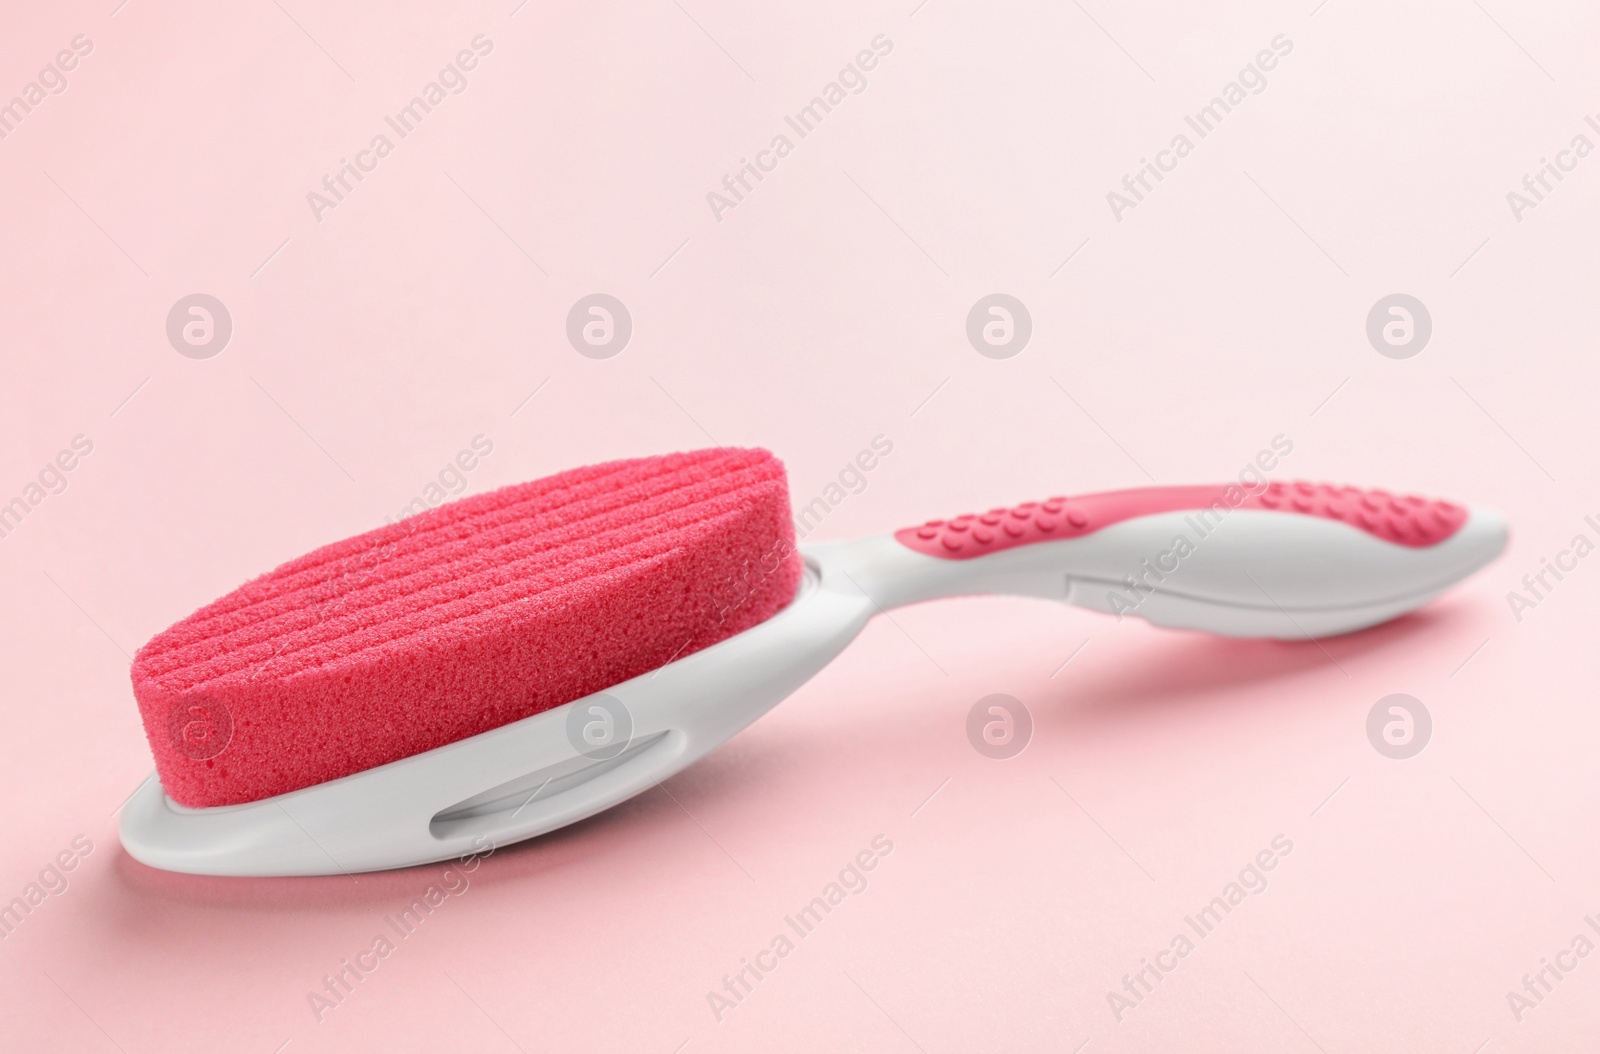 Photo of Pumice stone on pink background. Pedicure tool